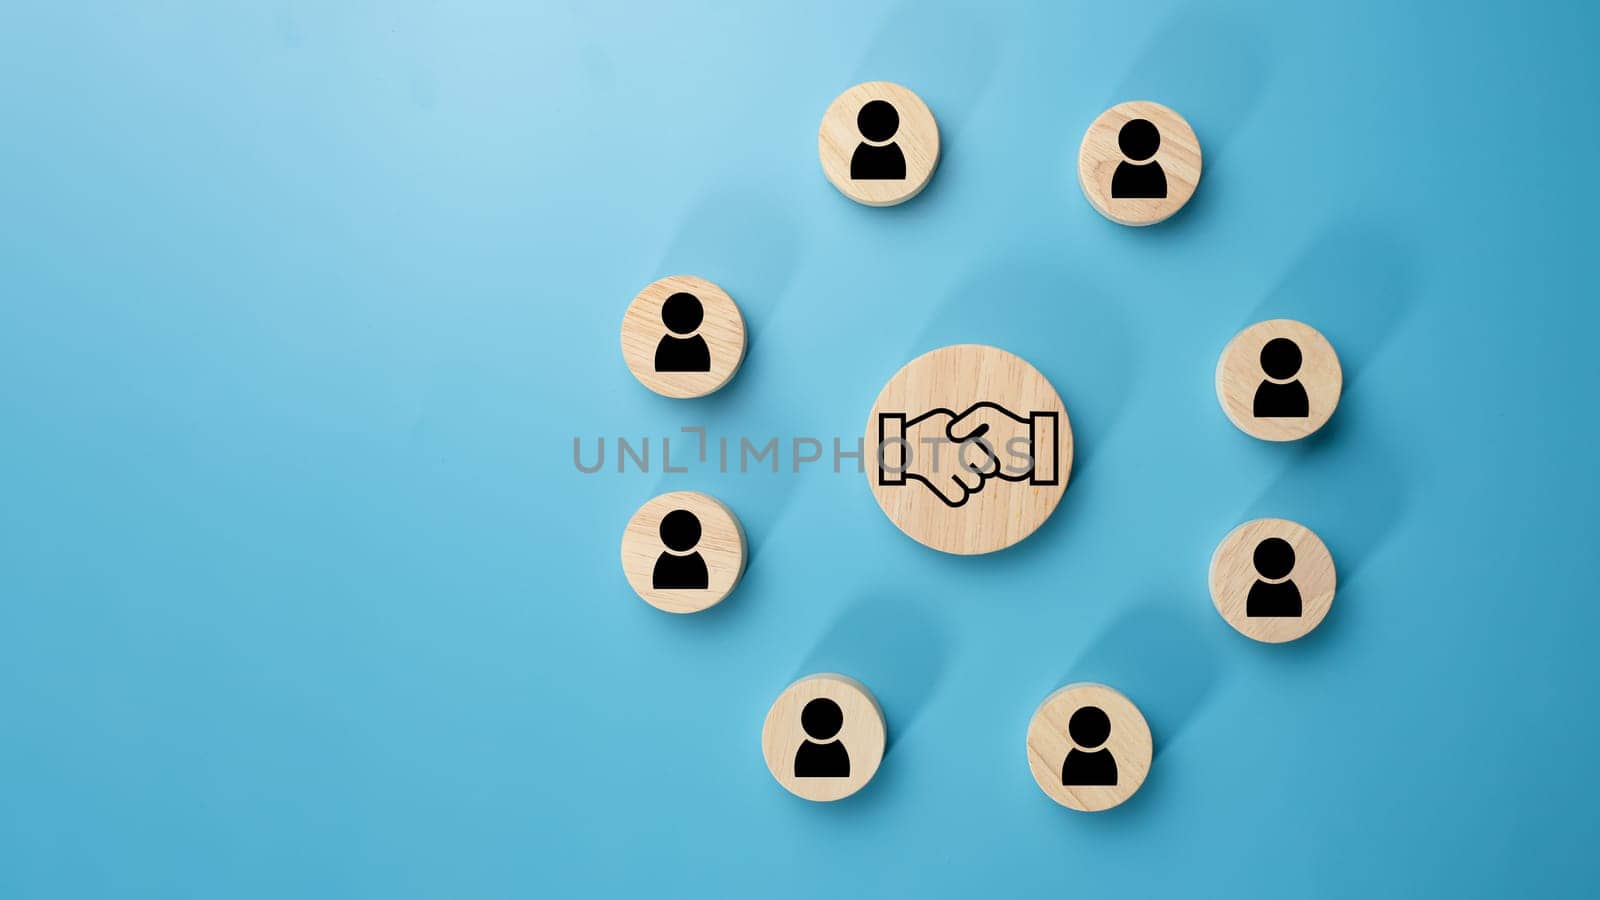 Team management concept, Human resources, Recruitment concept, HRM administration or human resource management concept, The handshake icon in a circular wooden board placed on a light blue background.